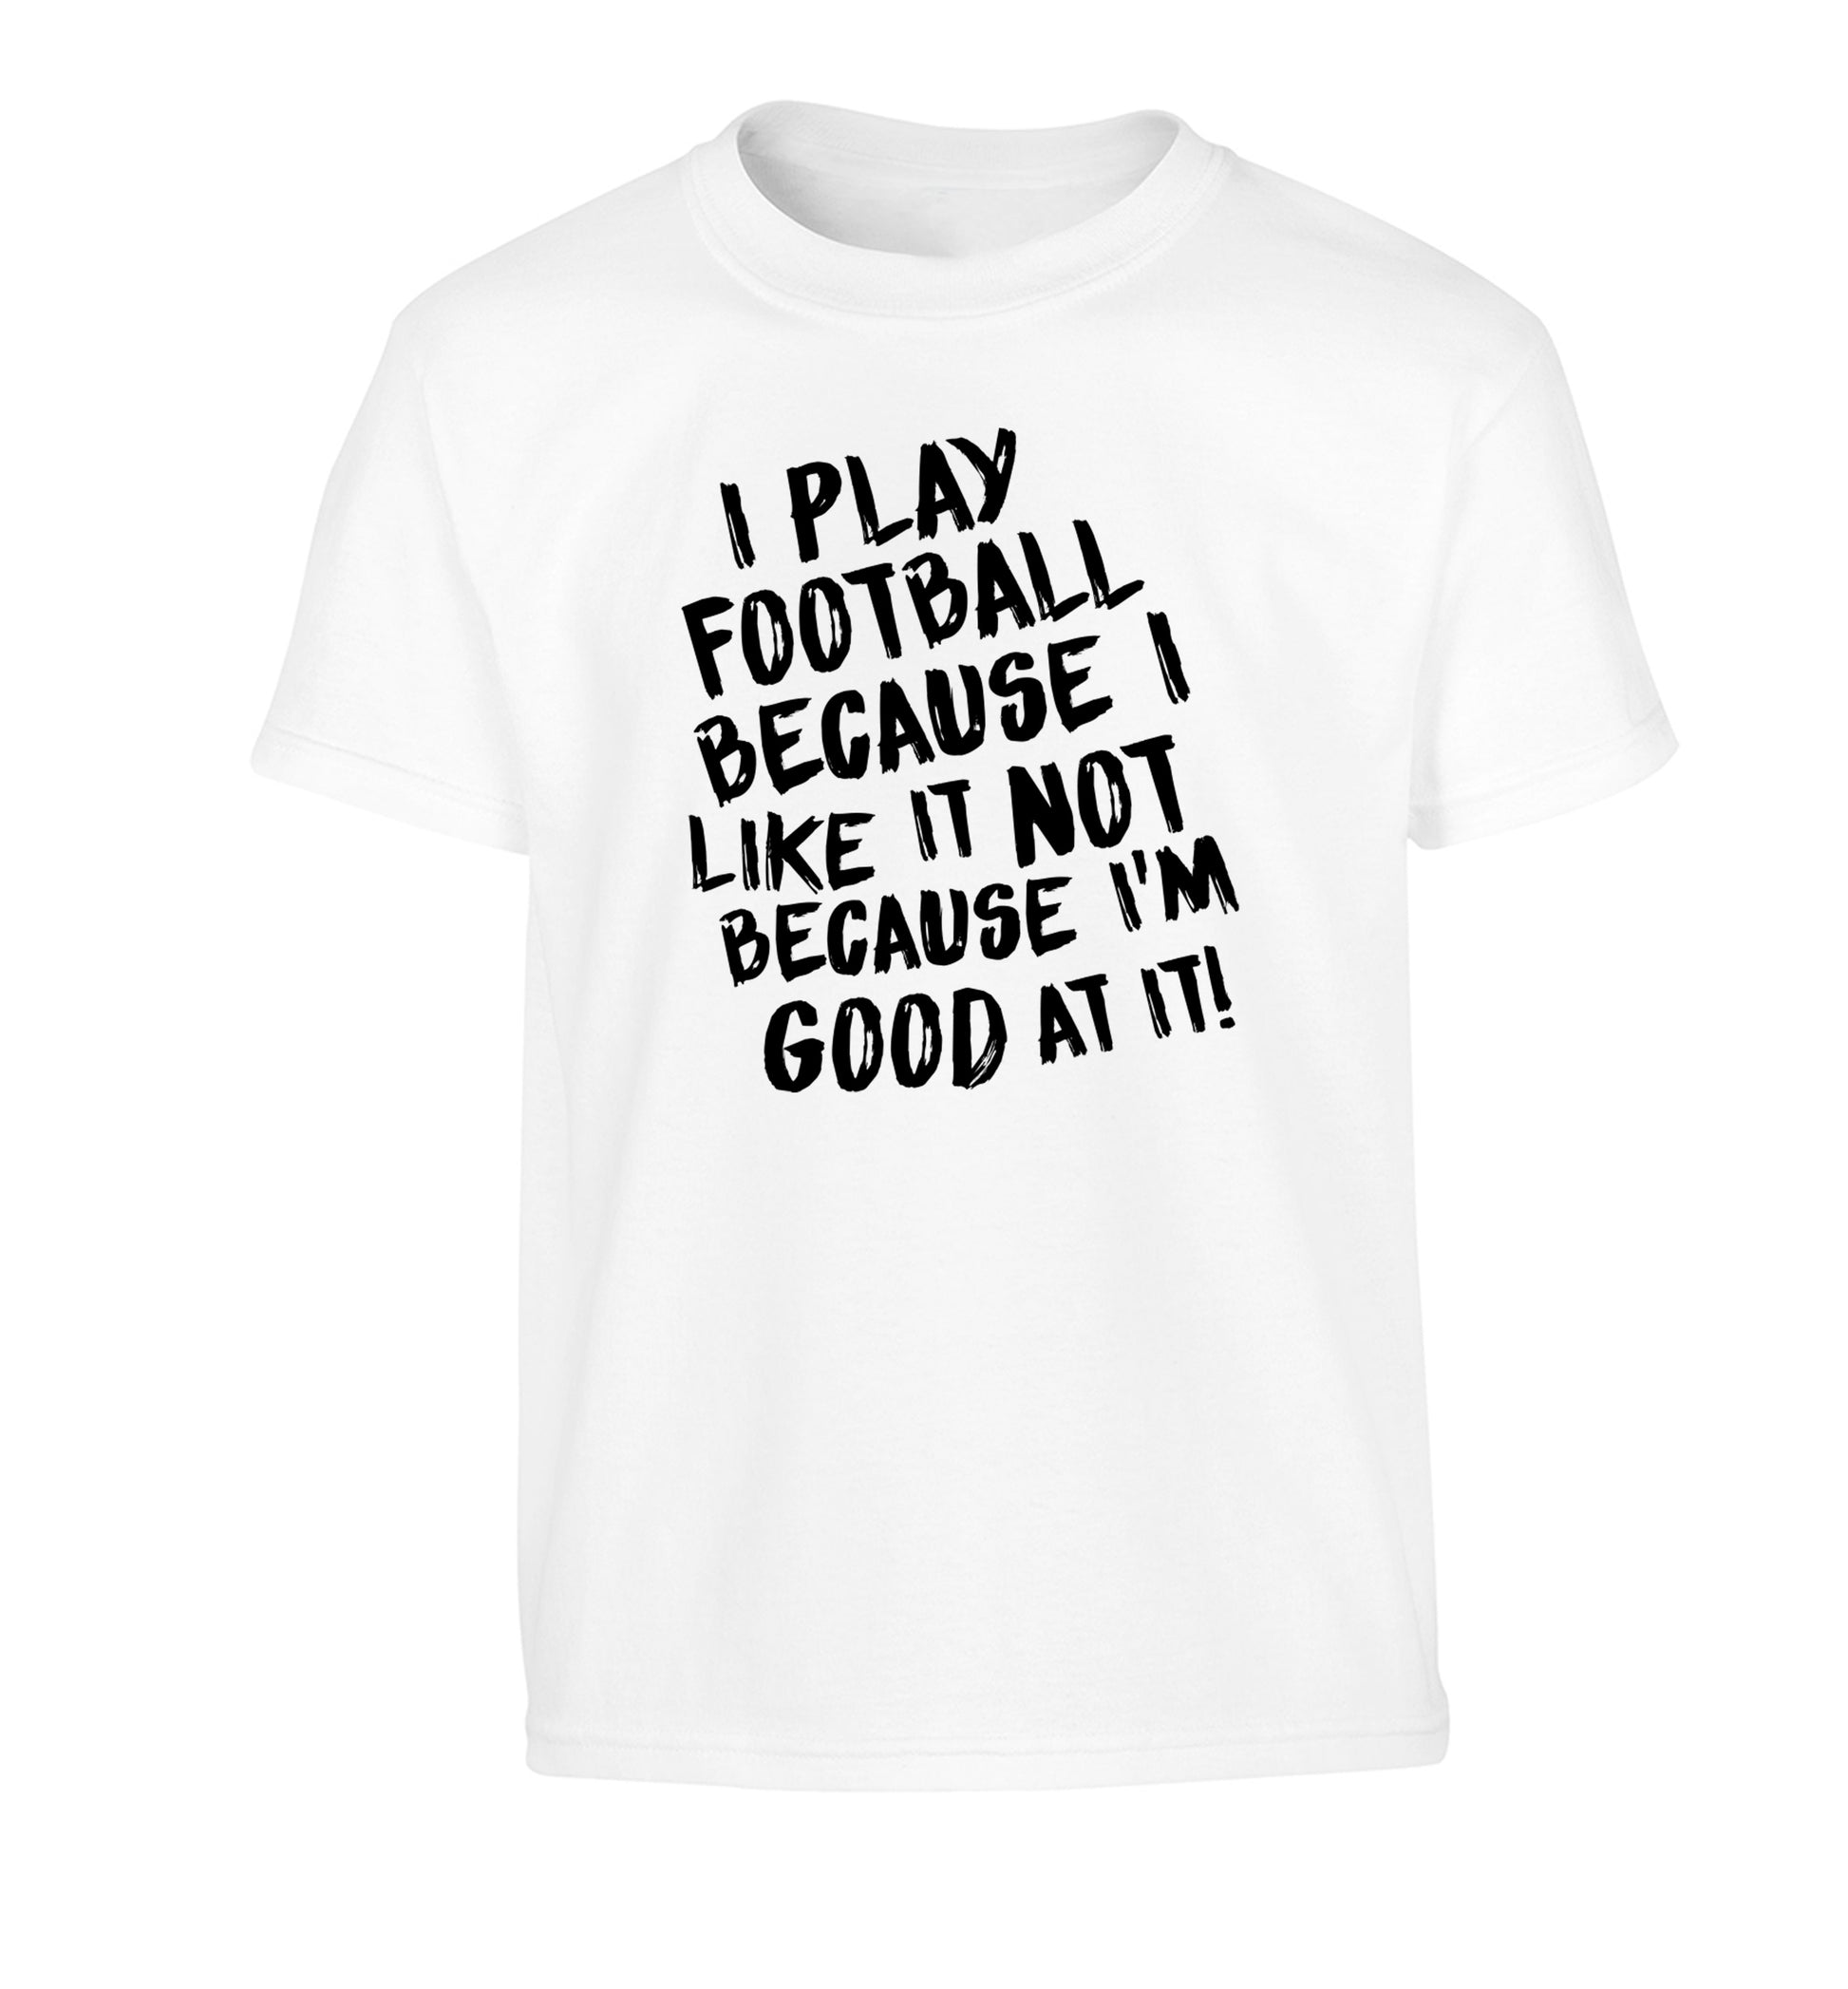 I play football because I like it not because I'm good at it Children's white Tshirt 12-14 Years